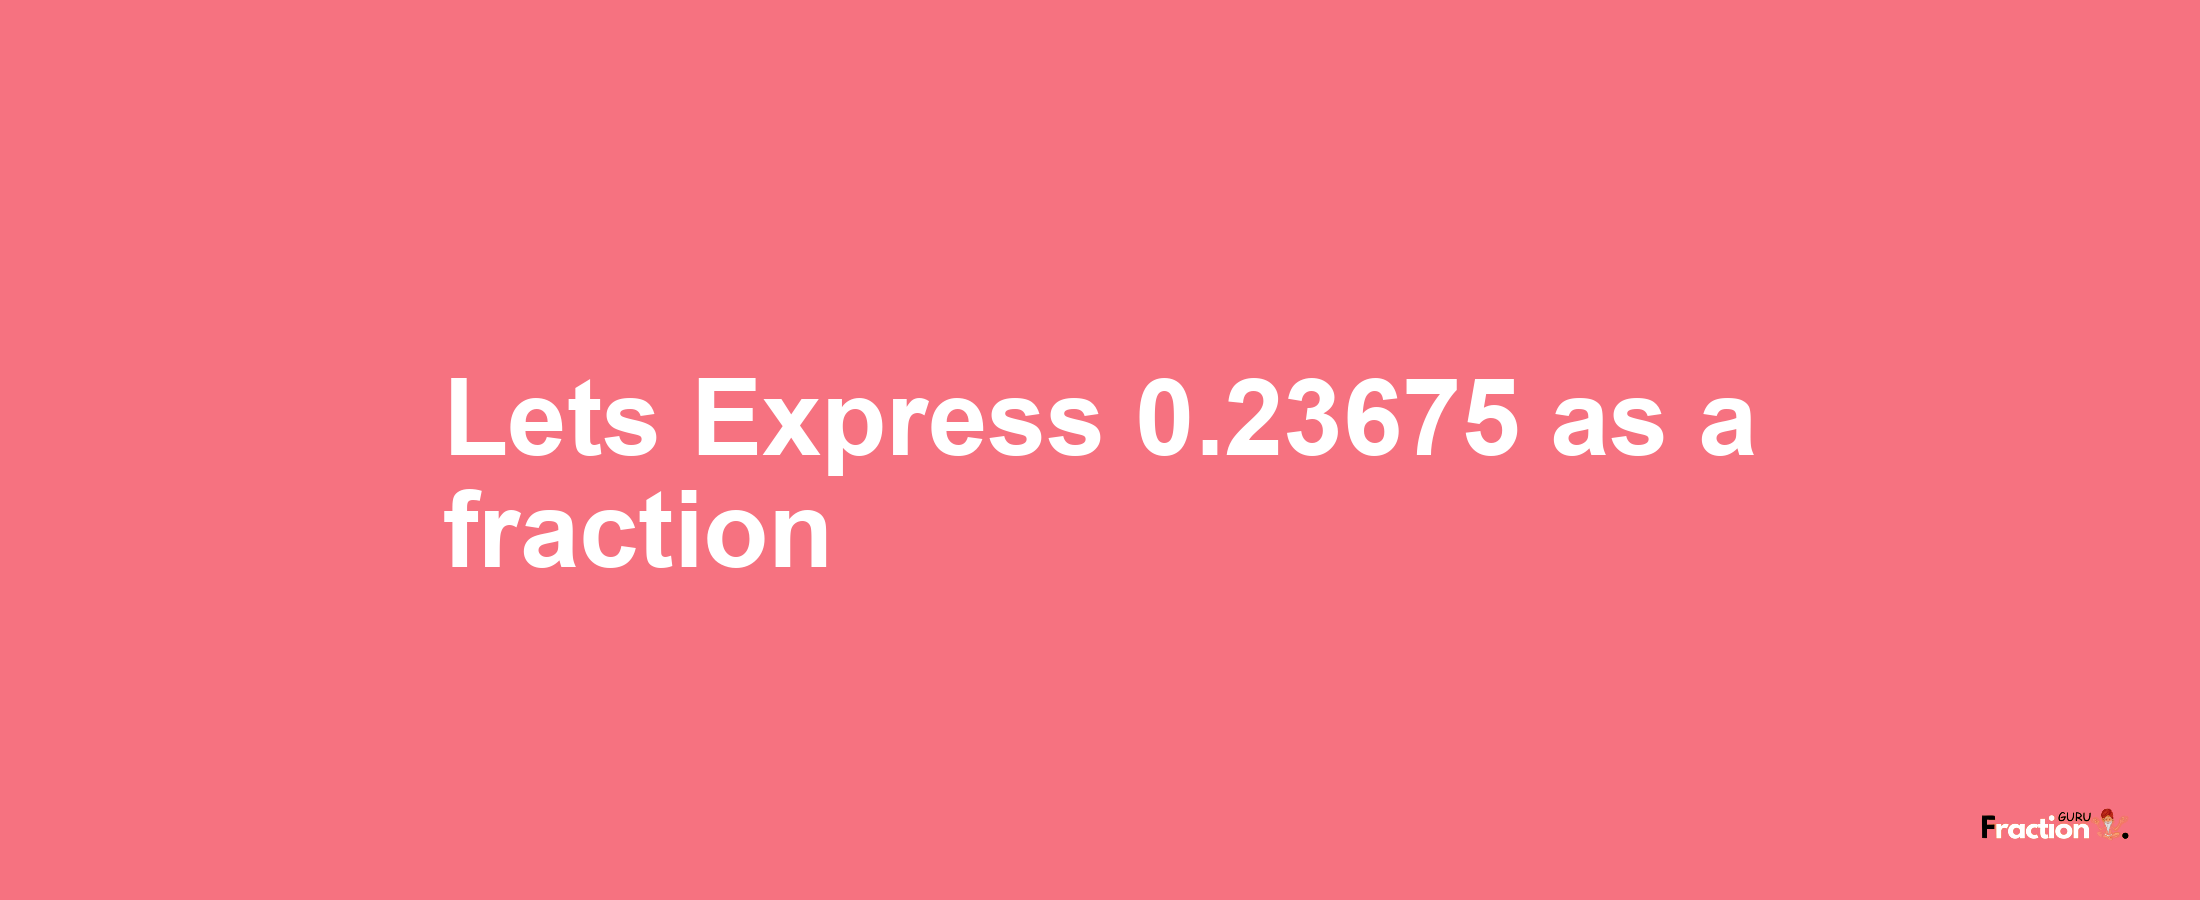 Lets Express 0.23675 as afraction